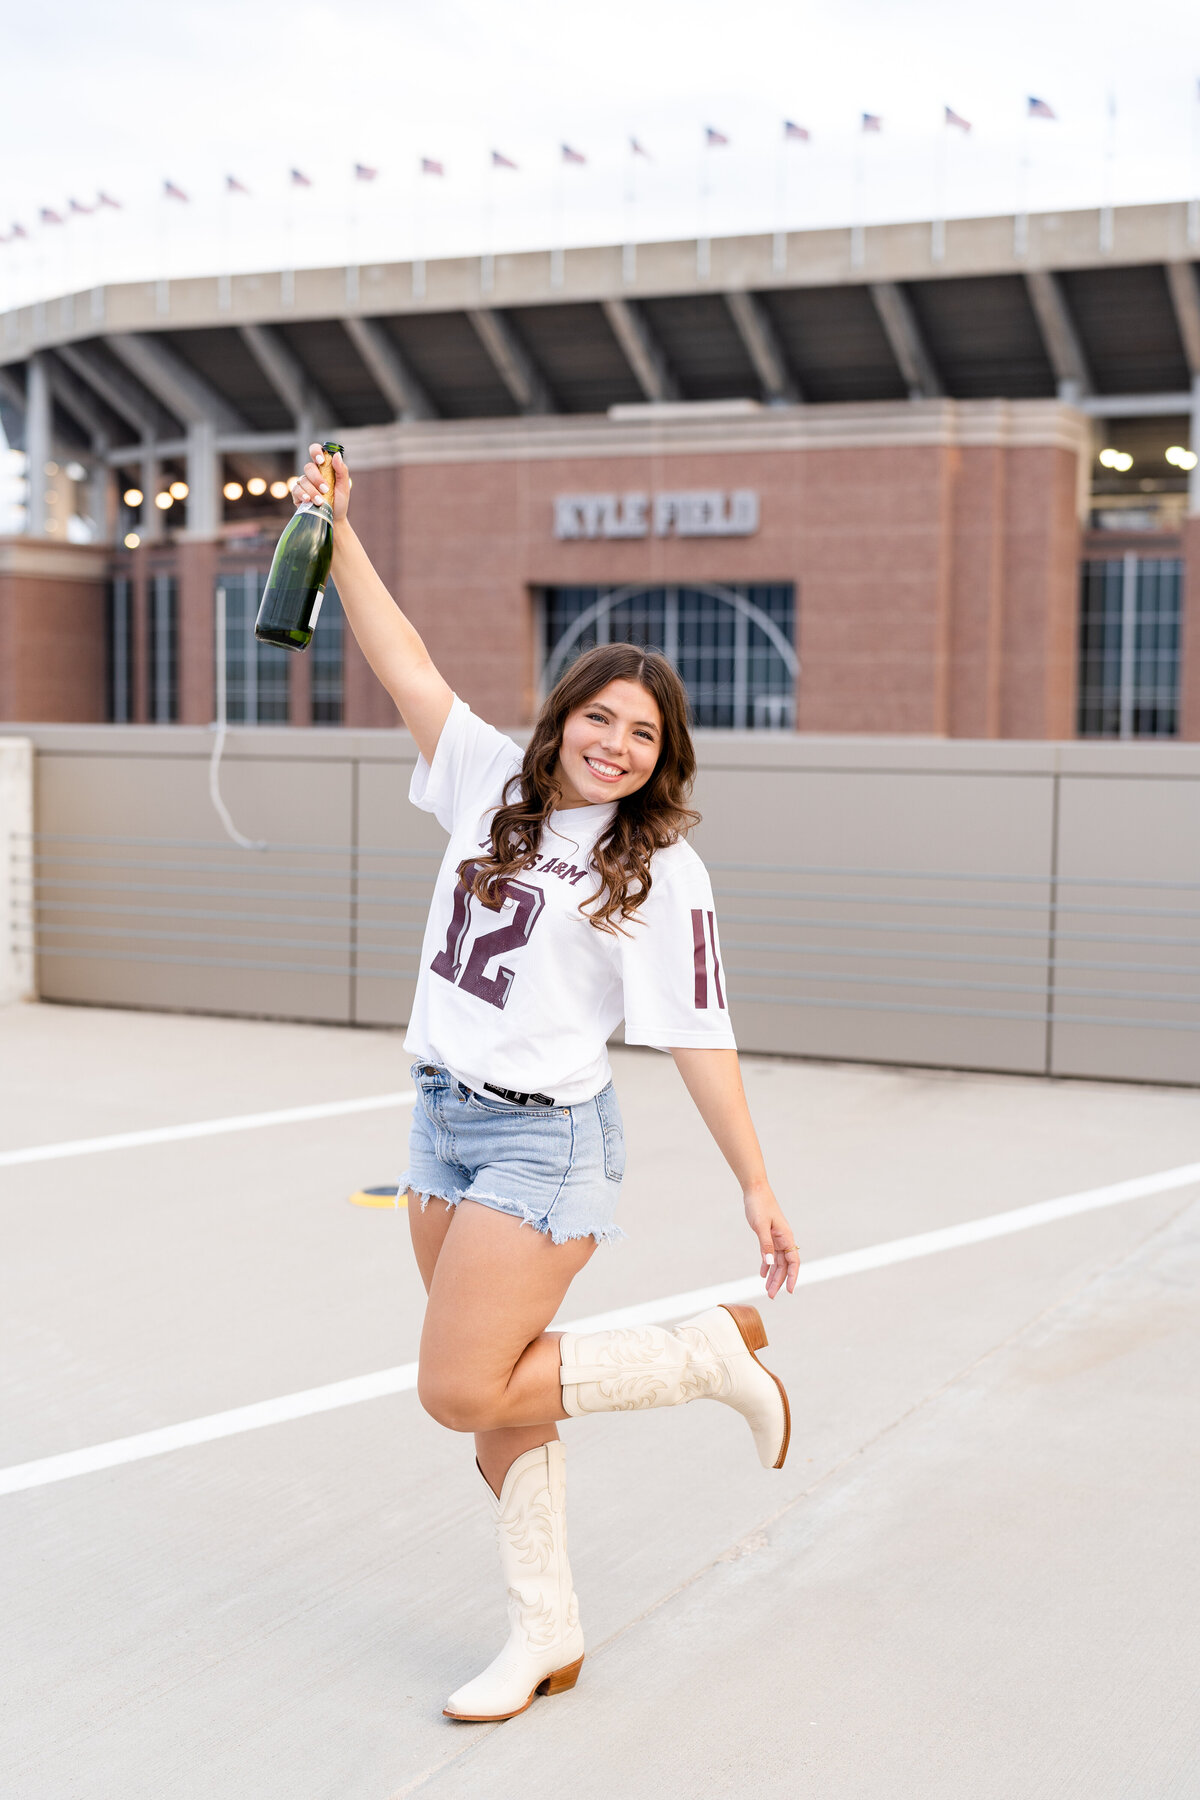 Texas A&M senior girl holding up champagne and celebrating while wearing white Aggie jersey on top of rooftop parking garage with Kyle Field in background